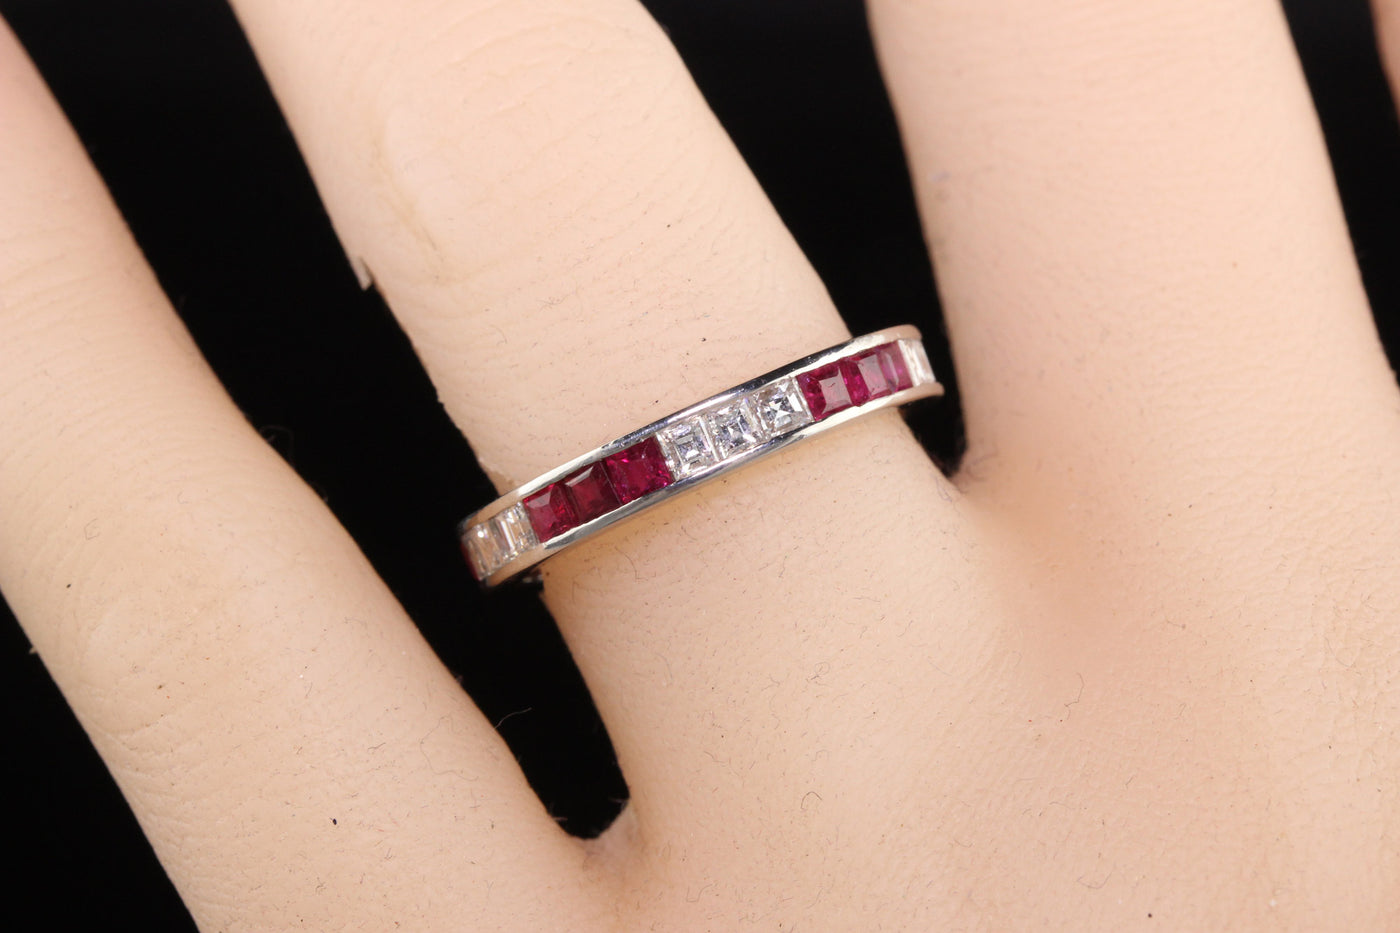 Antique Art Deco 18K White Gold Carre Cut Diamond and Ruby Wedding Band - Size 7.5